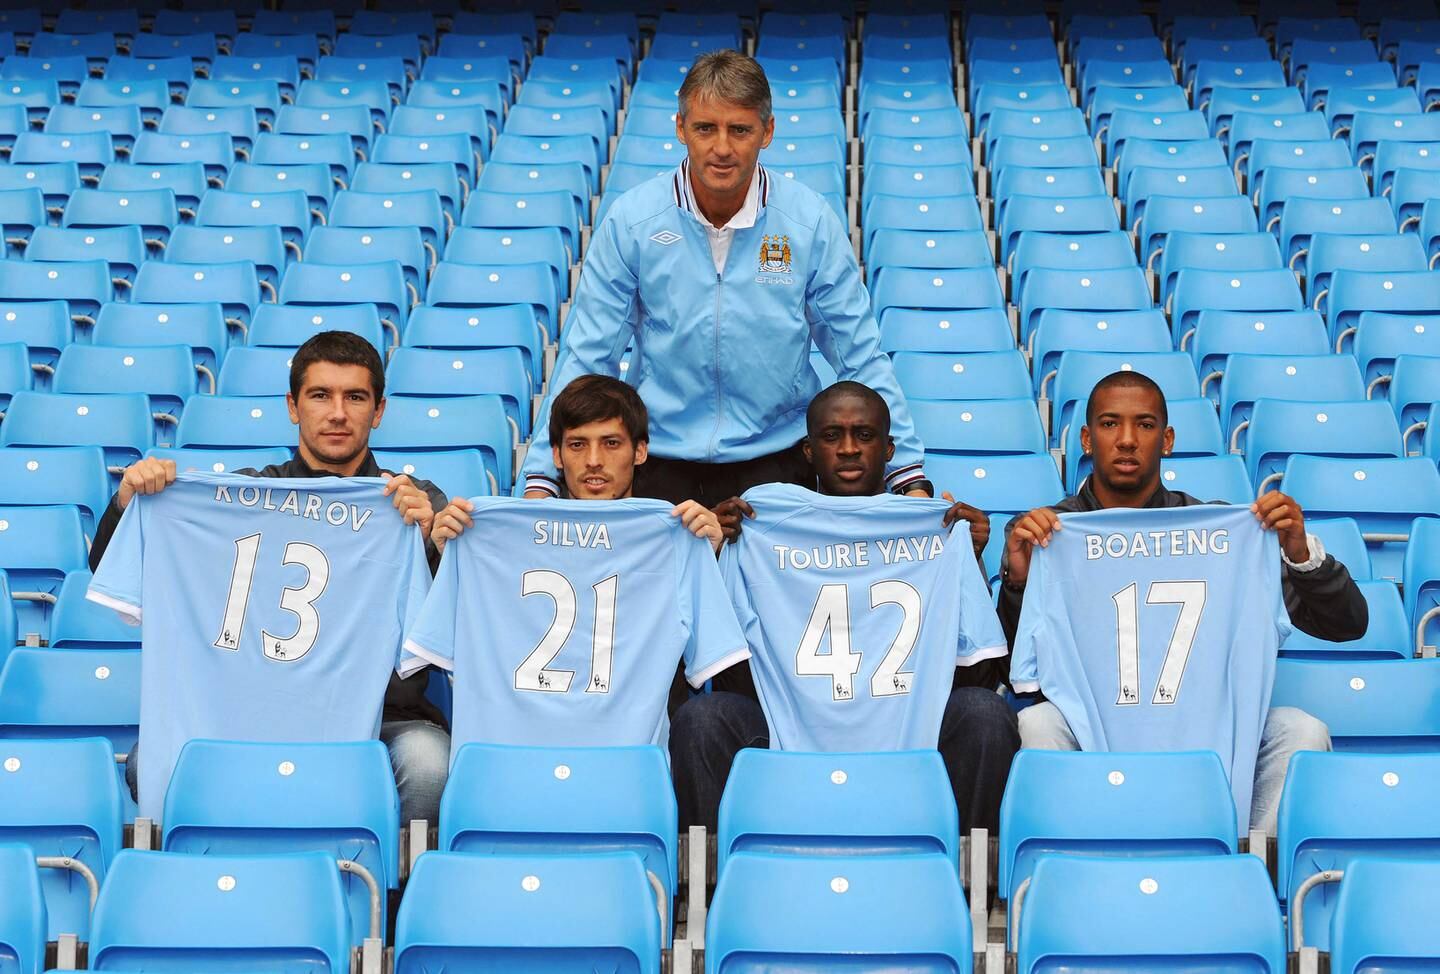 MANCHESTER, ENGLAND - AUGUST 6:  Manager Roberto Mancini (C) poses with new signings (L-R) Aleksandar Kolarov, David Silva, Yaya Toure and Jerome Boateng during a Manchester City training session at the City of Manchester Stadium on August 6, 2010 in Manchester, England.  (Photo by Clint Hughes/Getty Images)